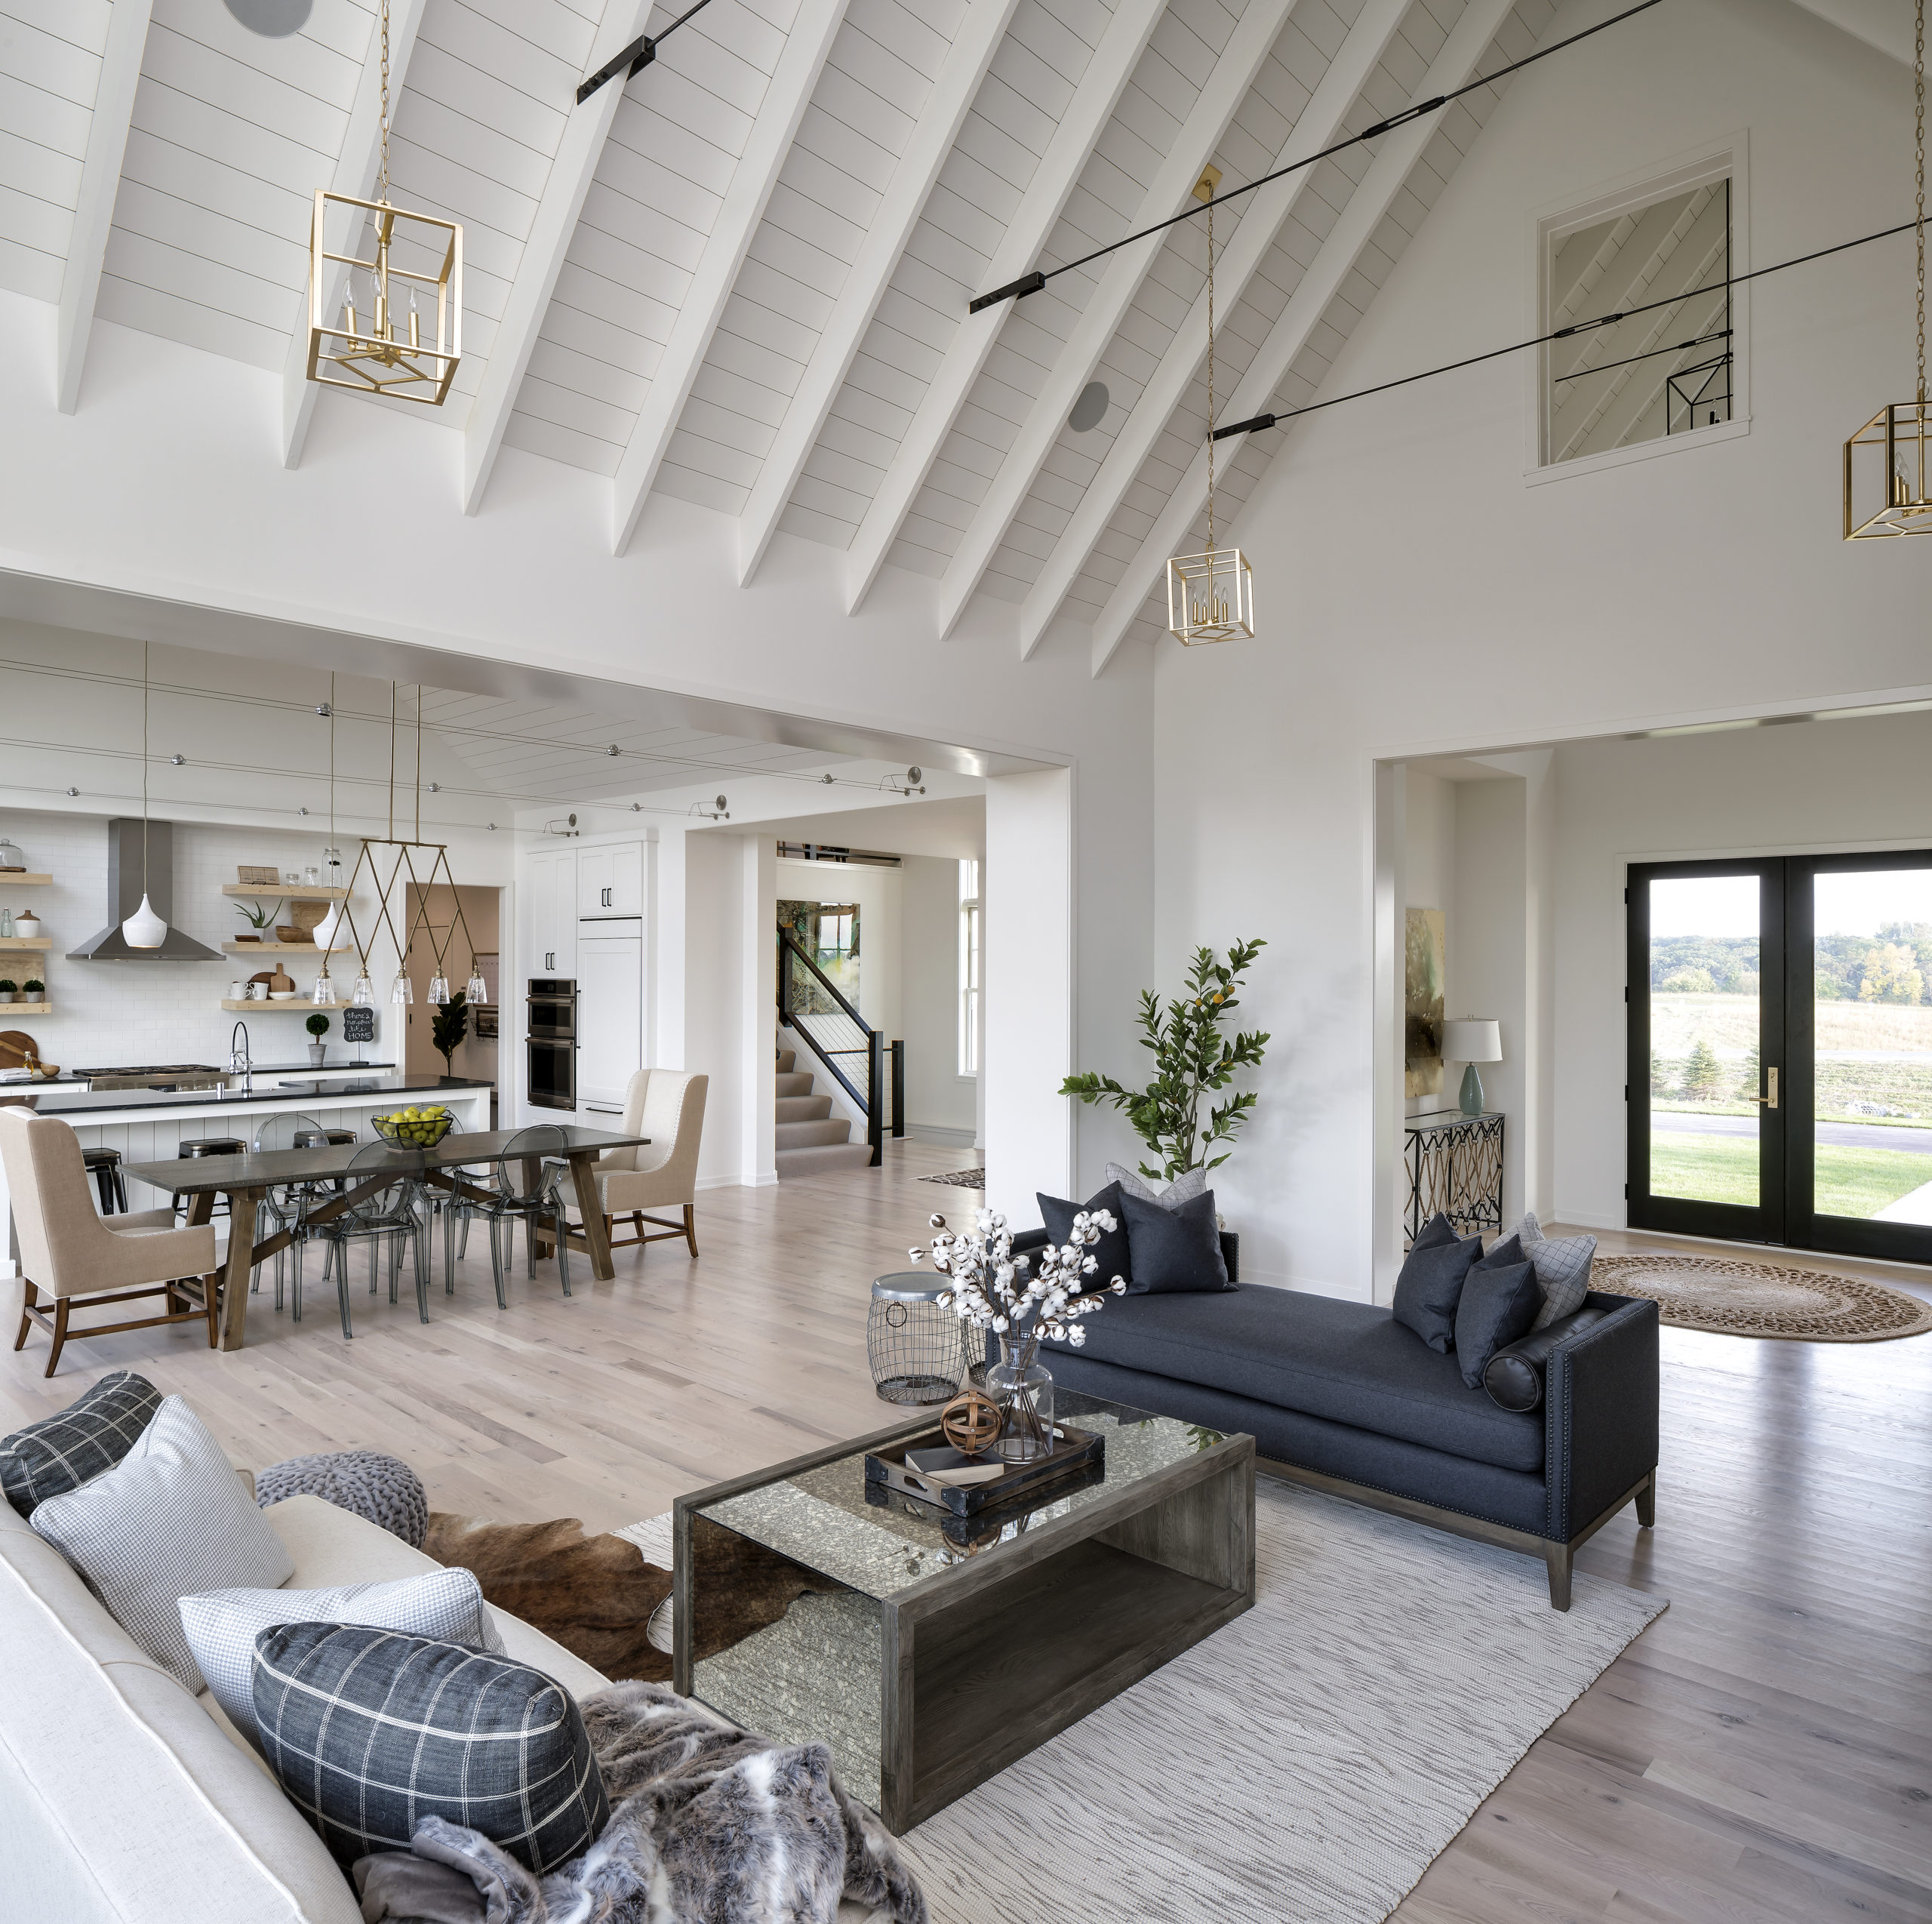 A large open living room with vaulted ceilings.